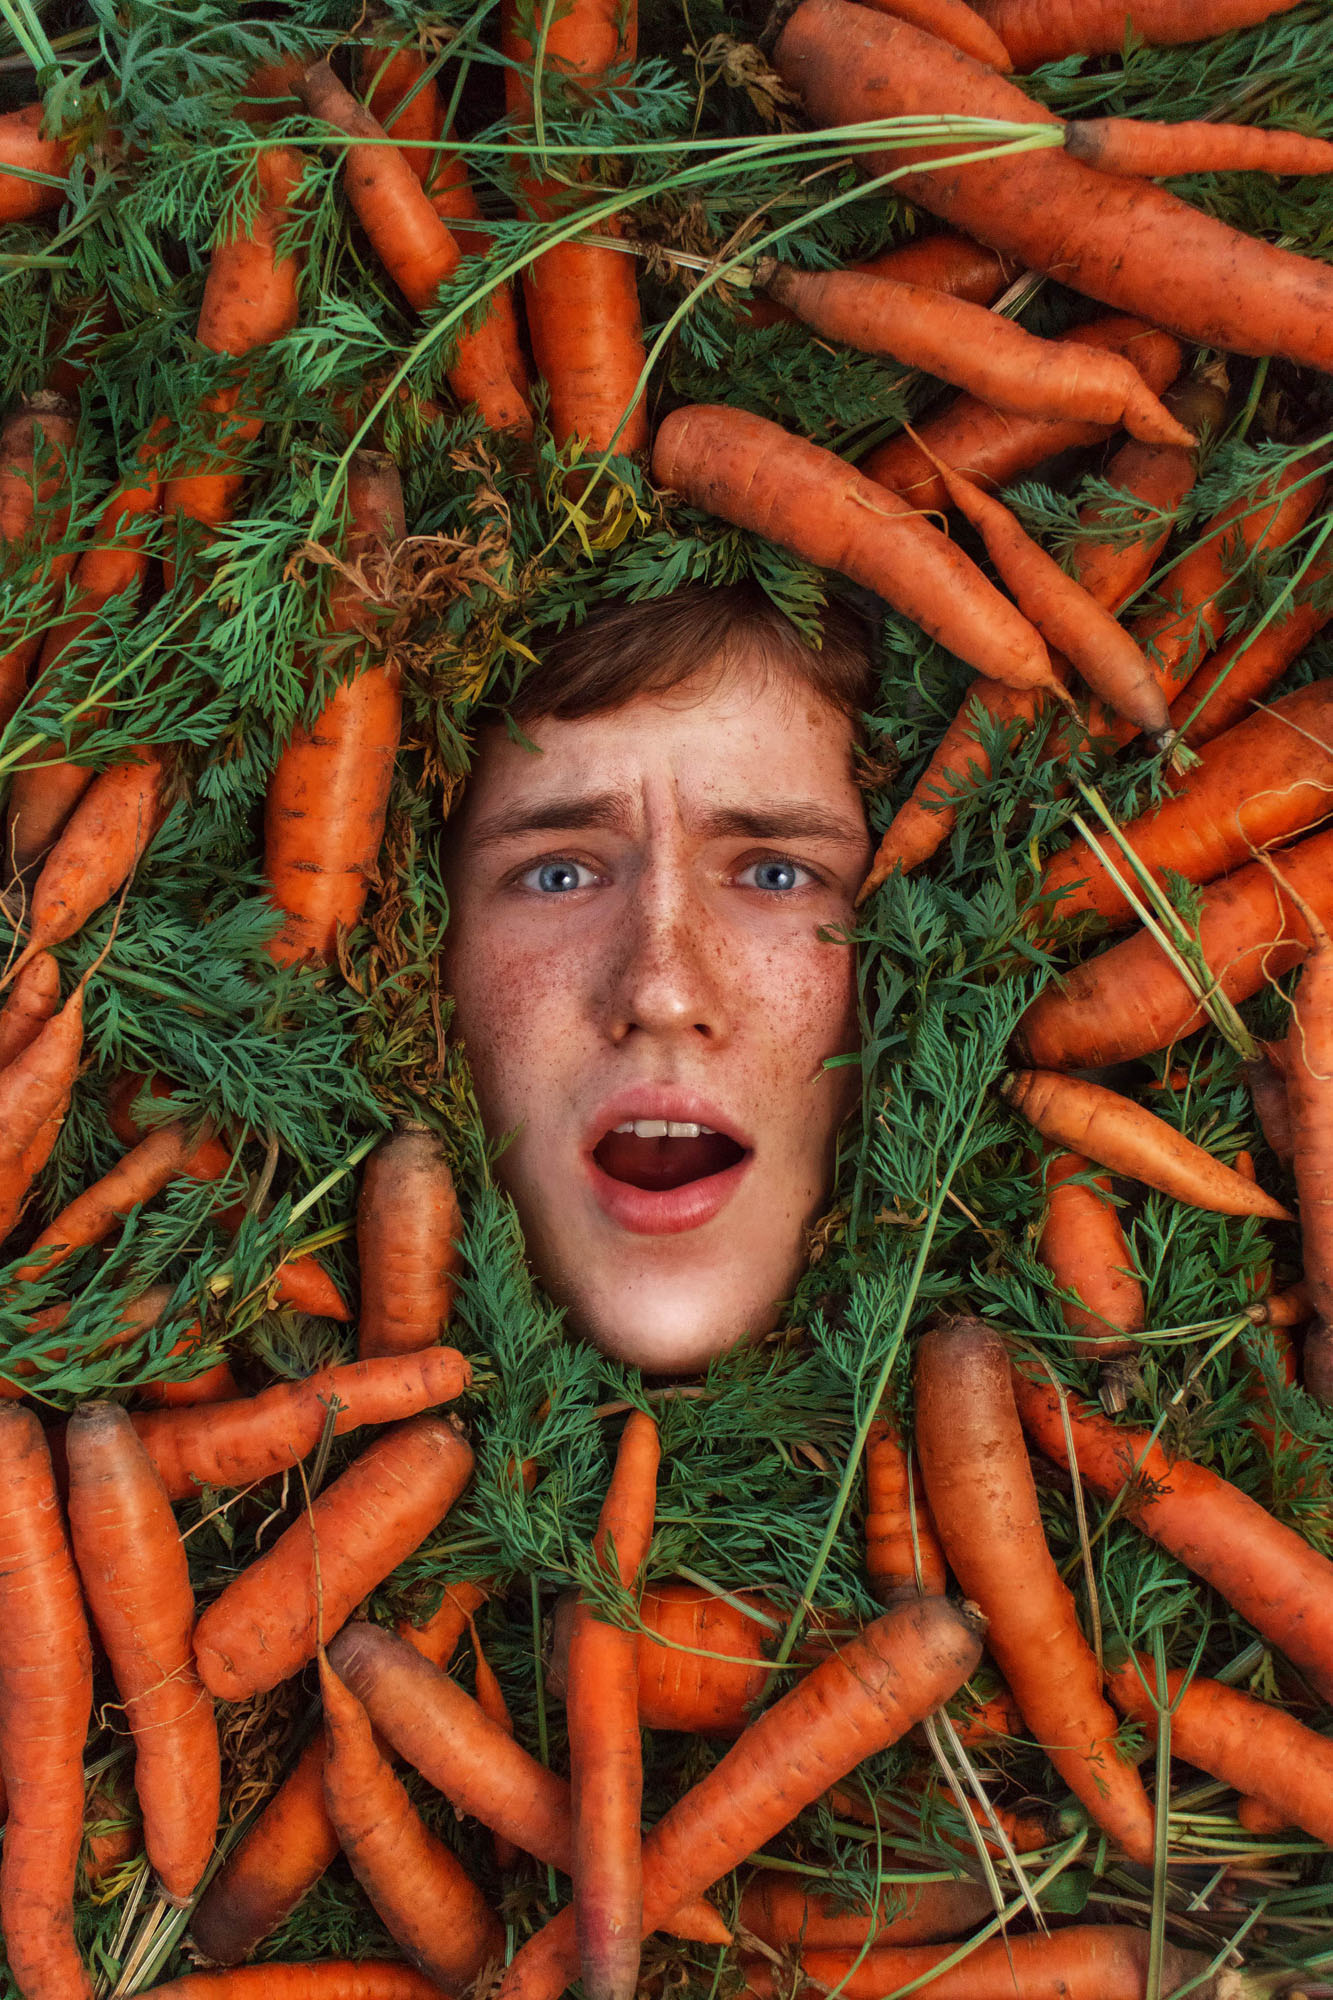 Carrot madness